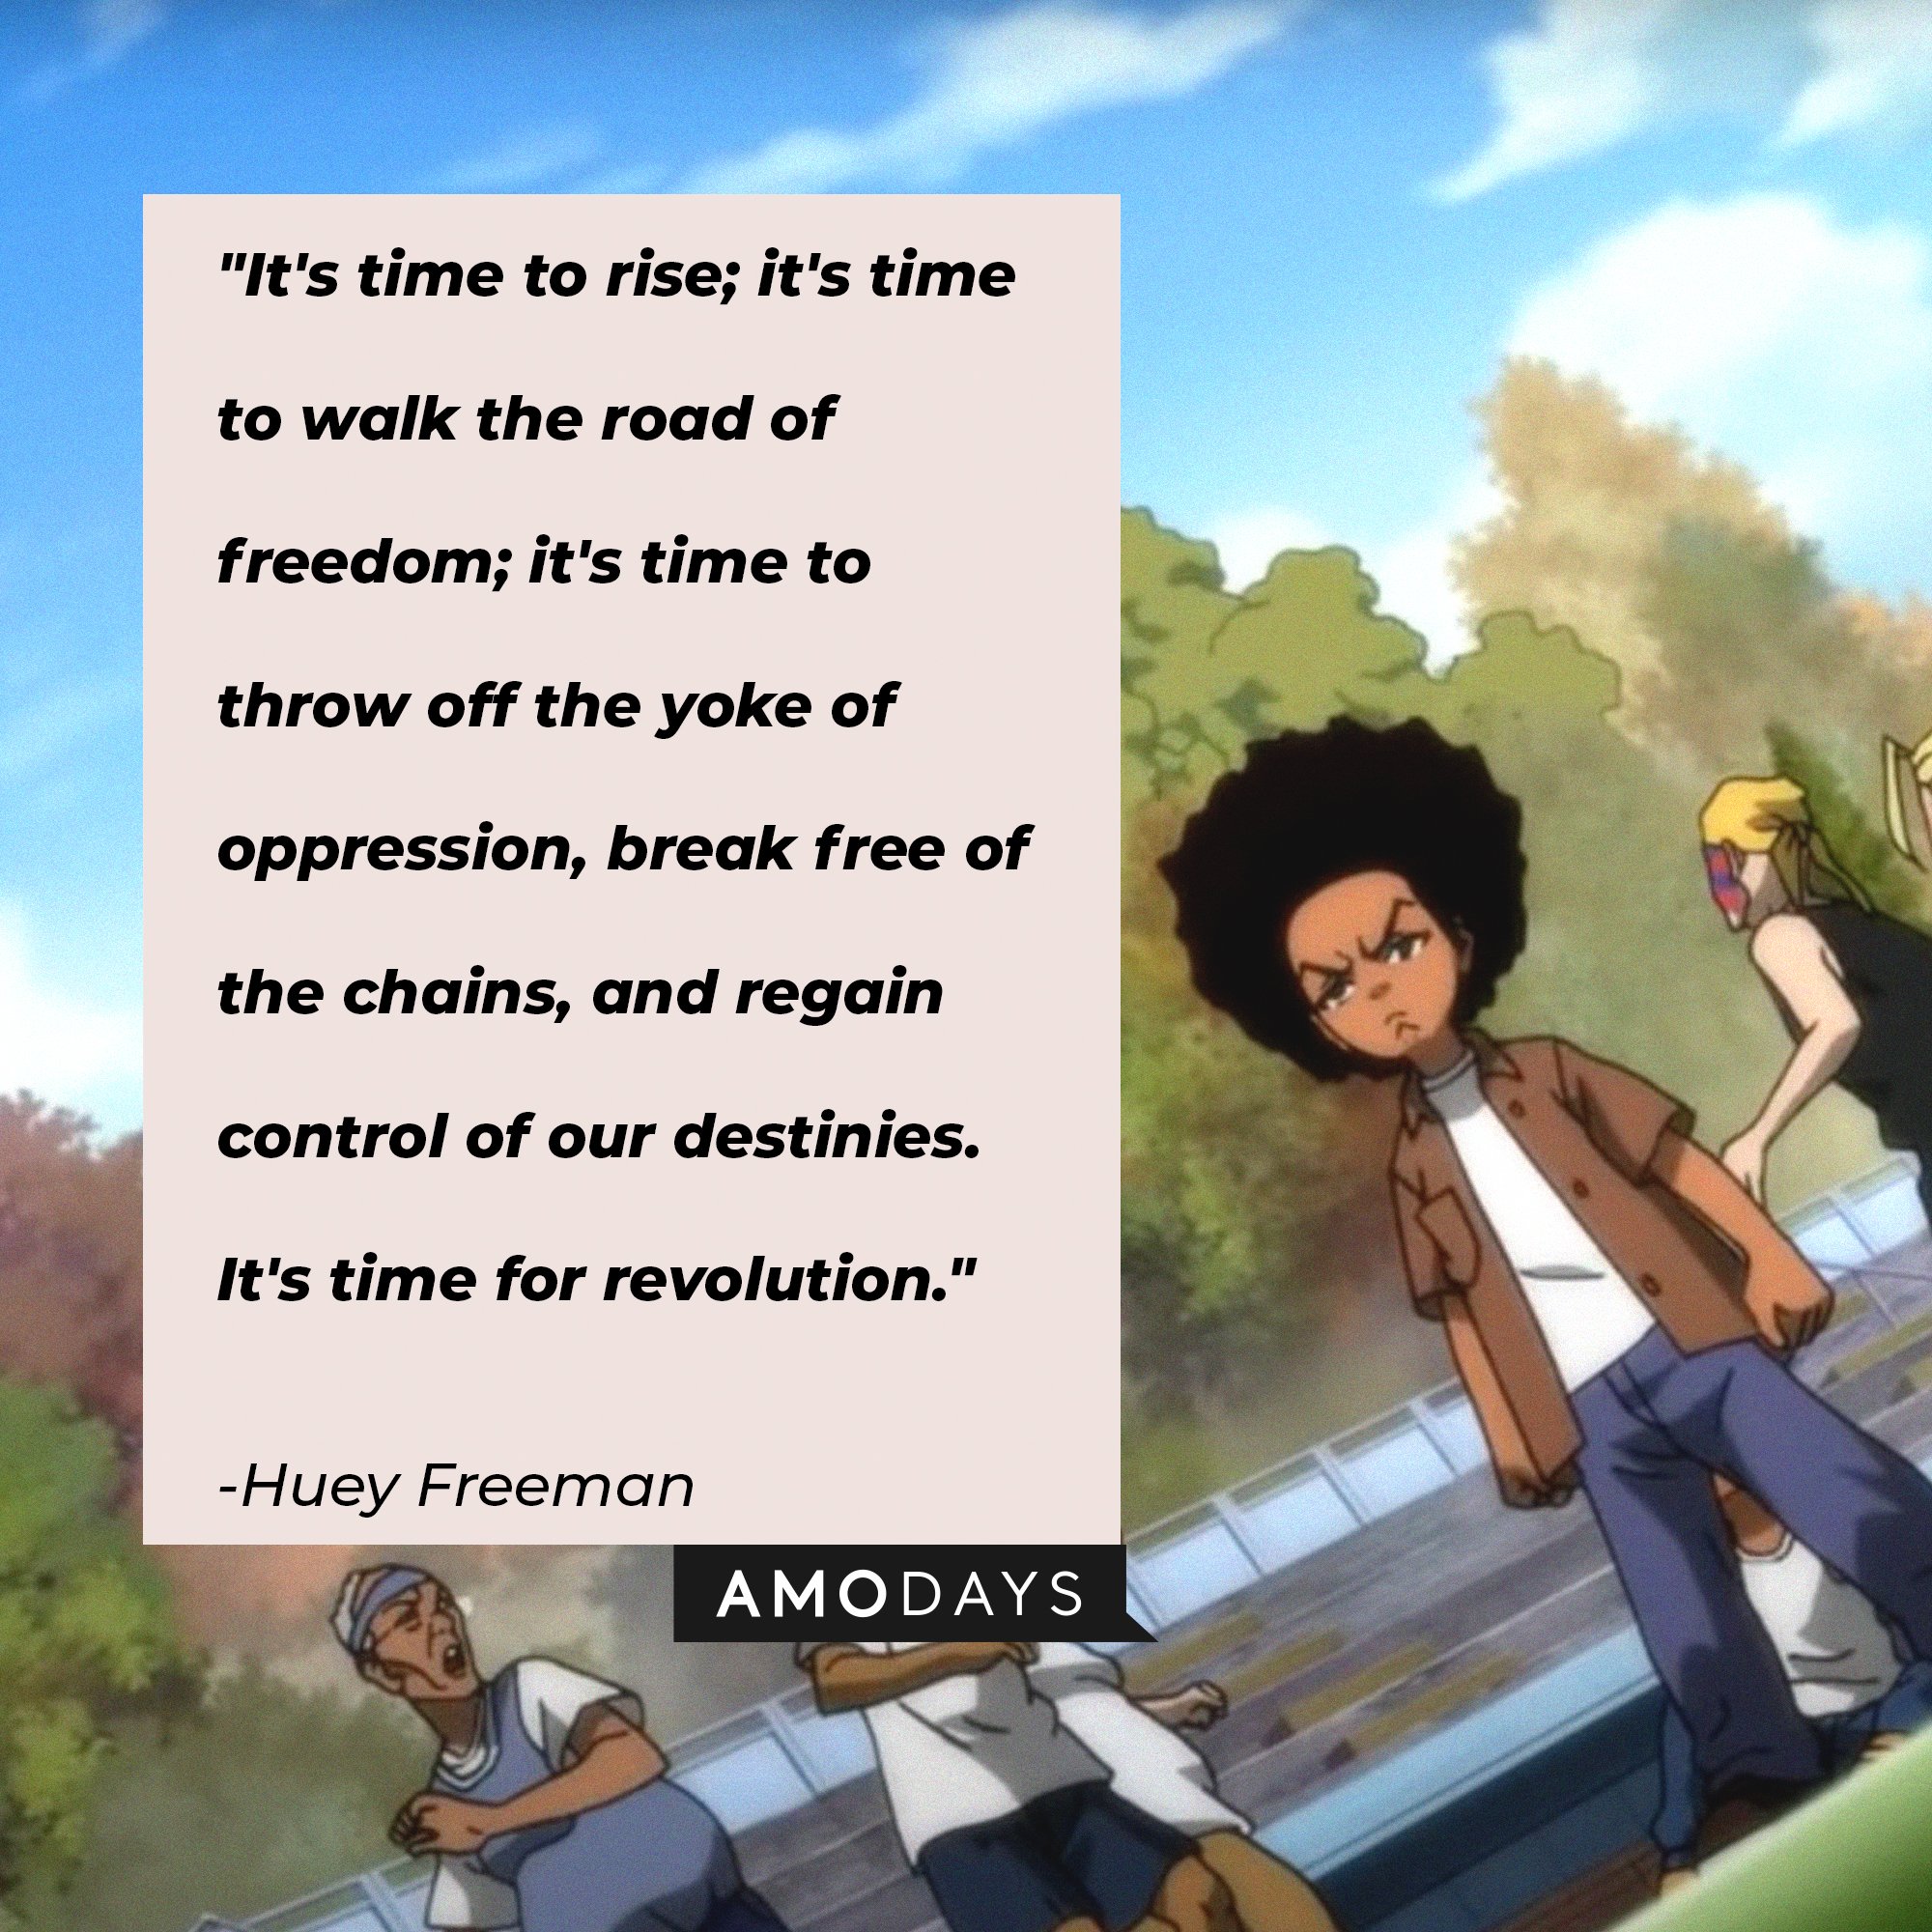 Huey Freeman's quote: "It's time to rise; it's time to walk the road of freedom; it's time to throw off the yoke of oppression, break free of the chains, and regain control of our destinies. It's time for revolution." | Image: AmoDays